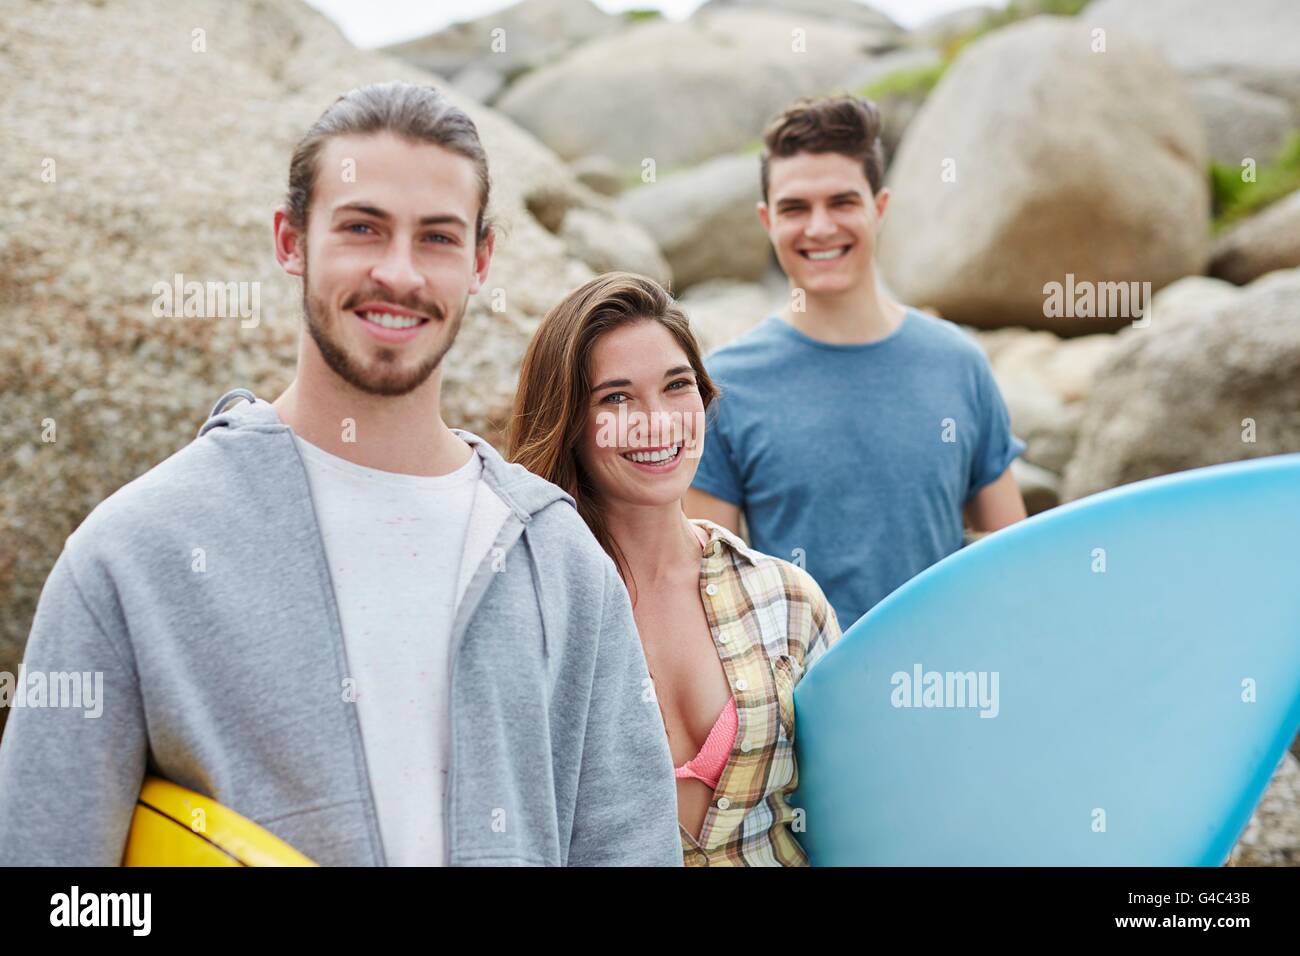 MODEL RELEASED. Young adults with surfboard. Stock Photo